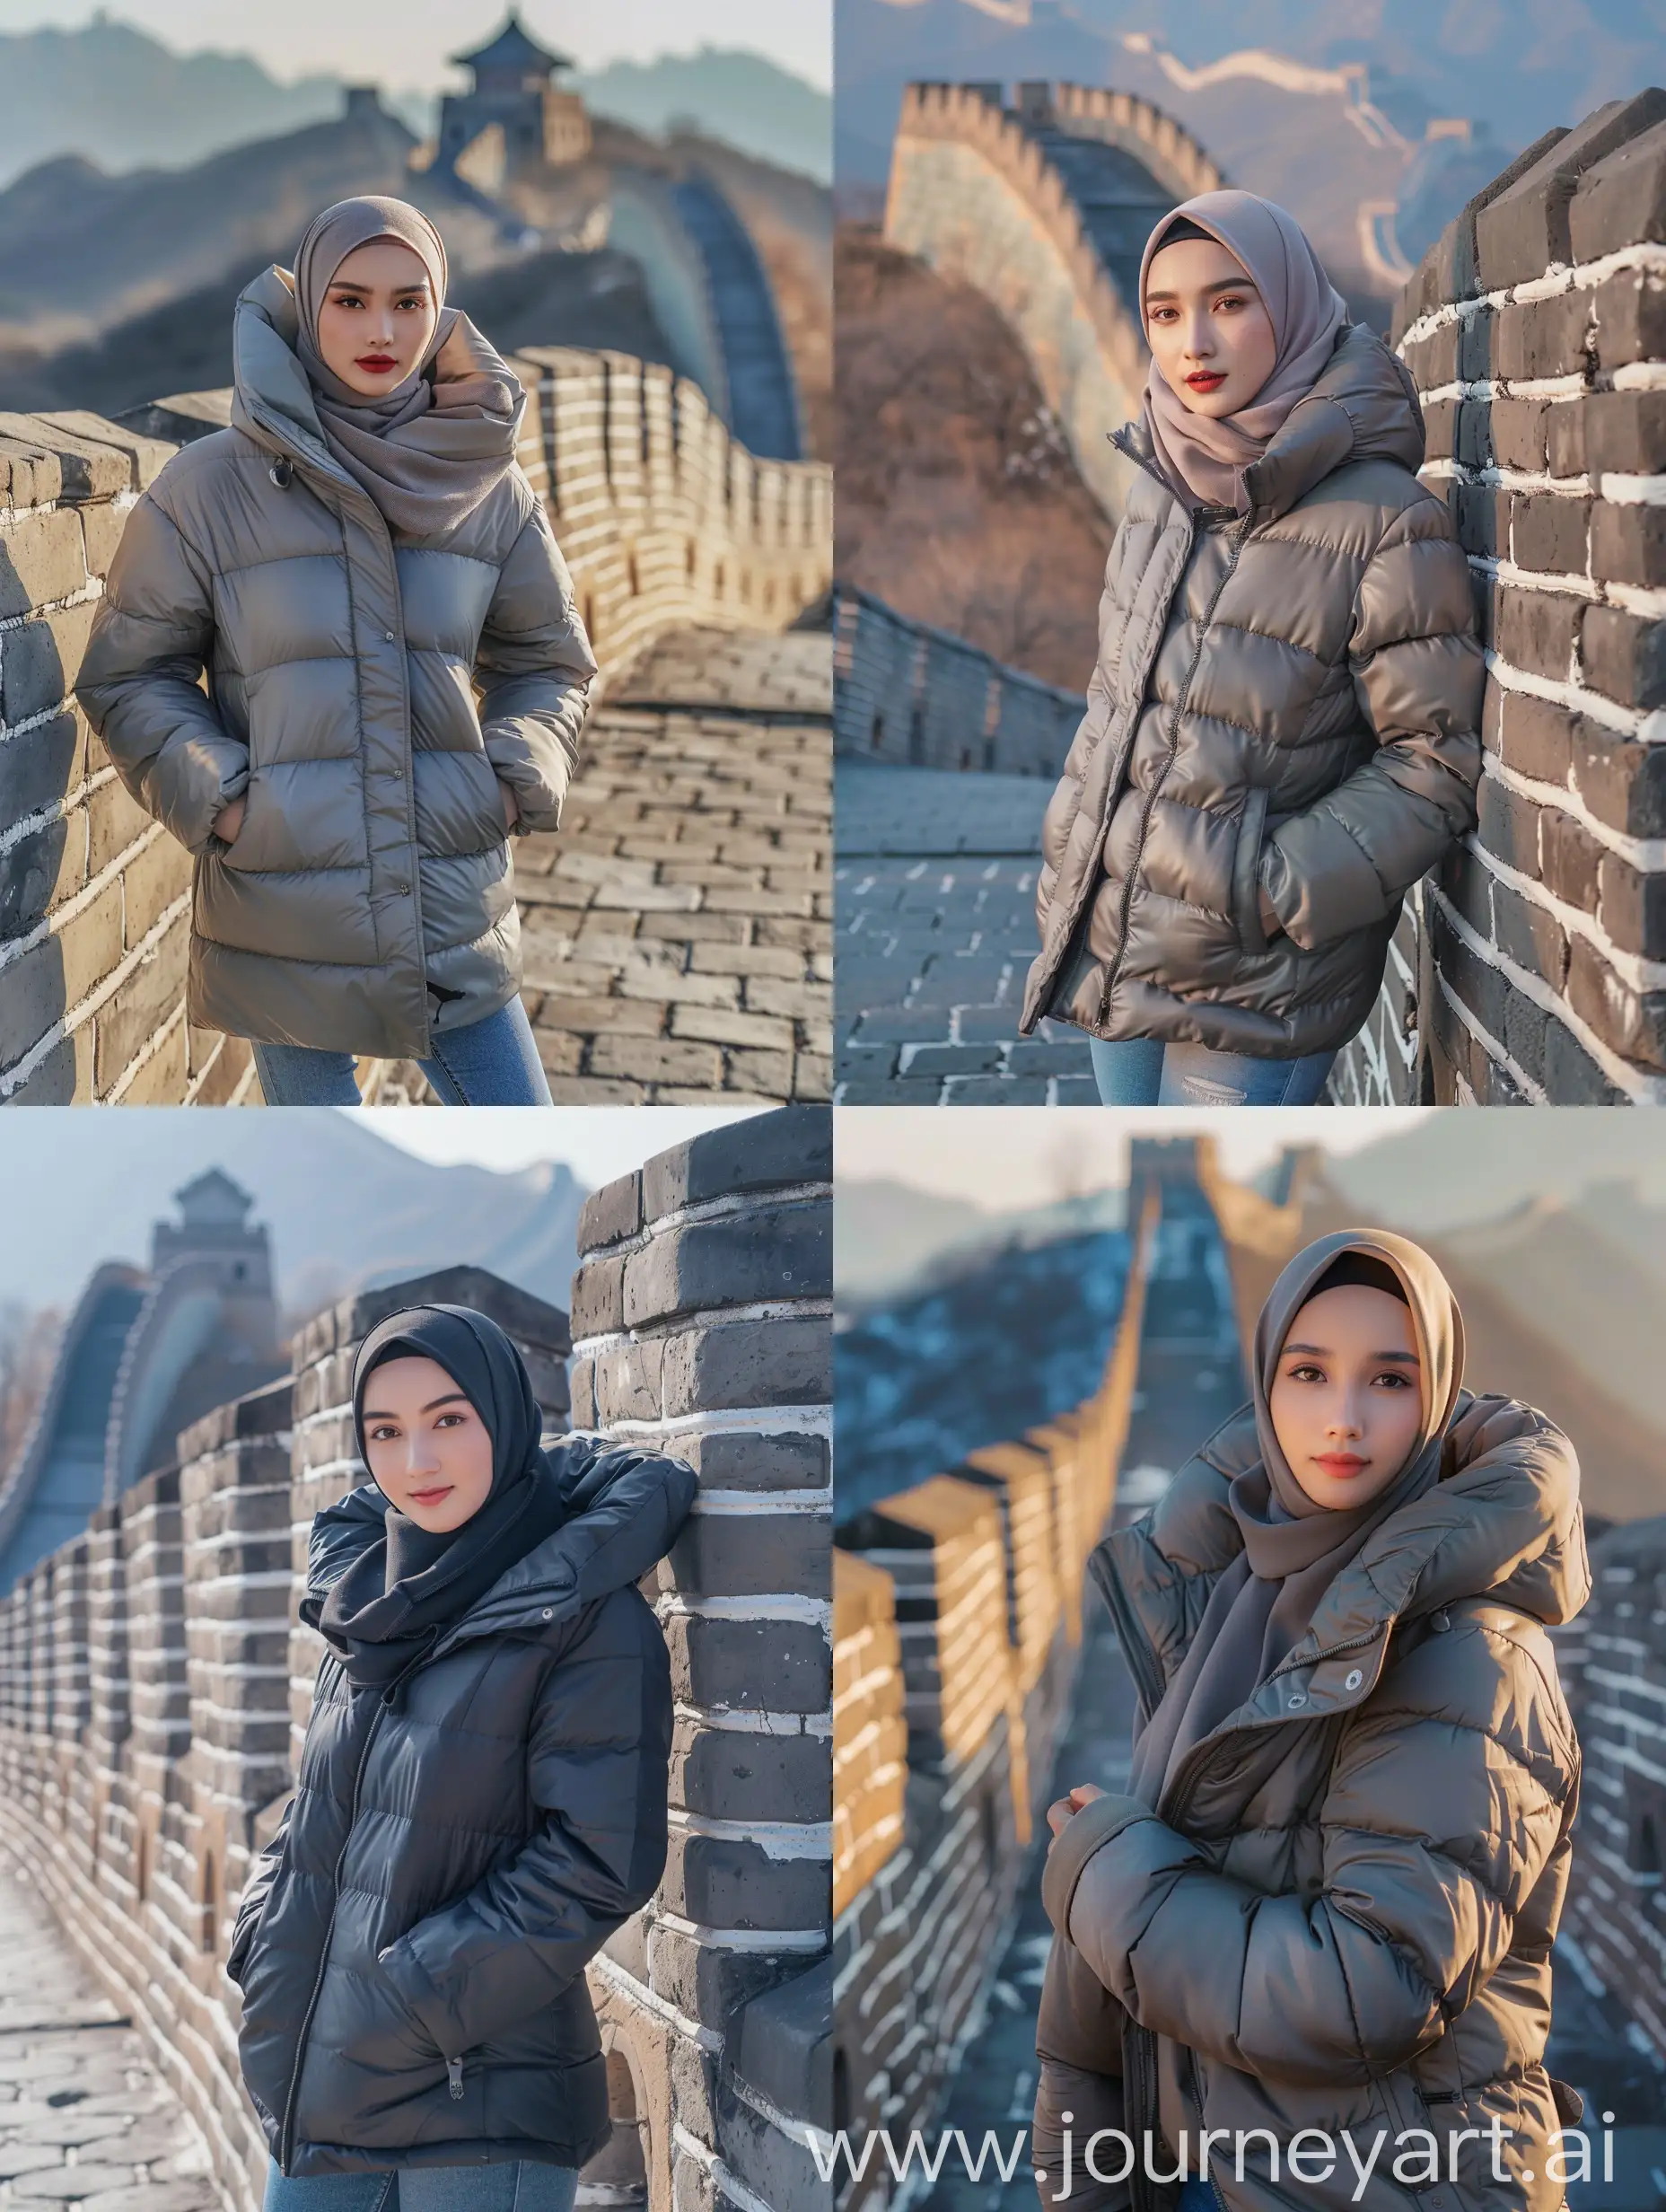 Indonesian-Javanese-Woman-Posing-on-Great-Wall-of-China-at-Sunrise